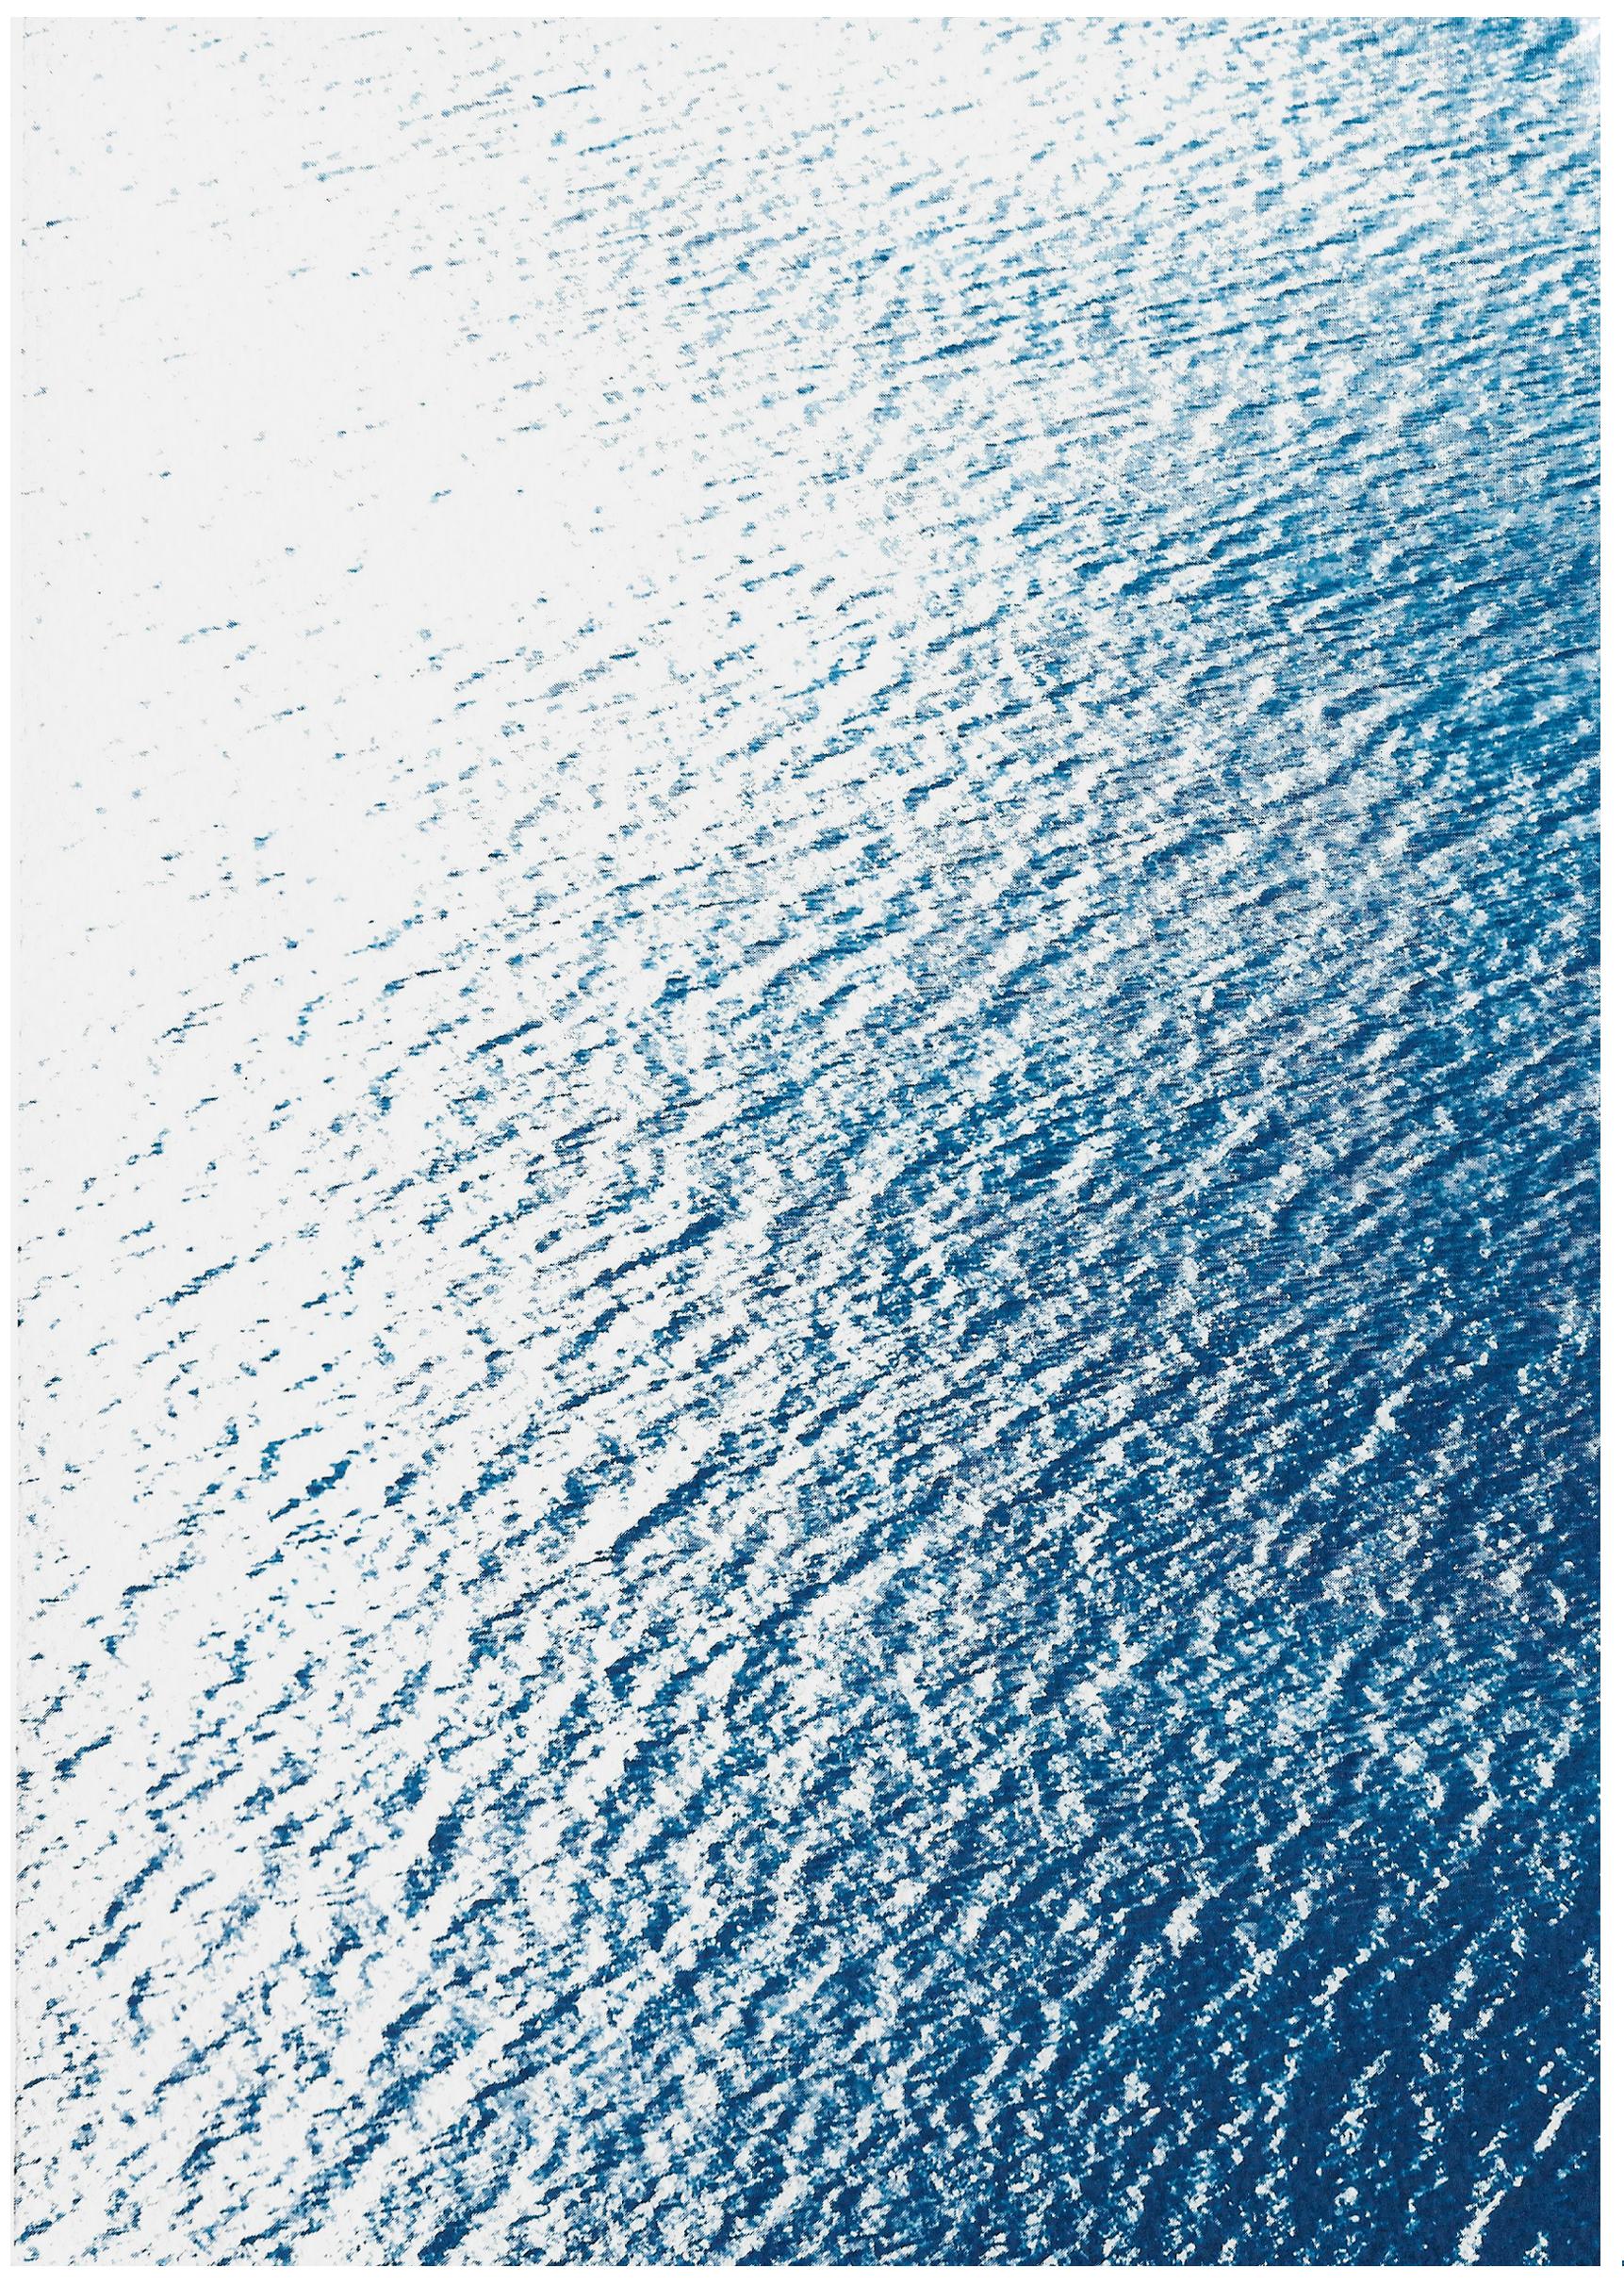 This is an exclusive handprinted limited edition cyanotype.

Details:
+ Title: Smooth Bay in the Mediterranean
+ Year: 2019
+ Edition Size: 20
+ Stamped and Certificate of Authenticity provided
+ Measurements : 100x140 cm (40 x 55 in.) Each paper